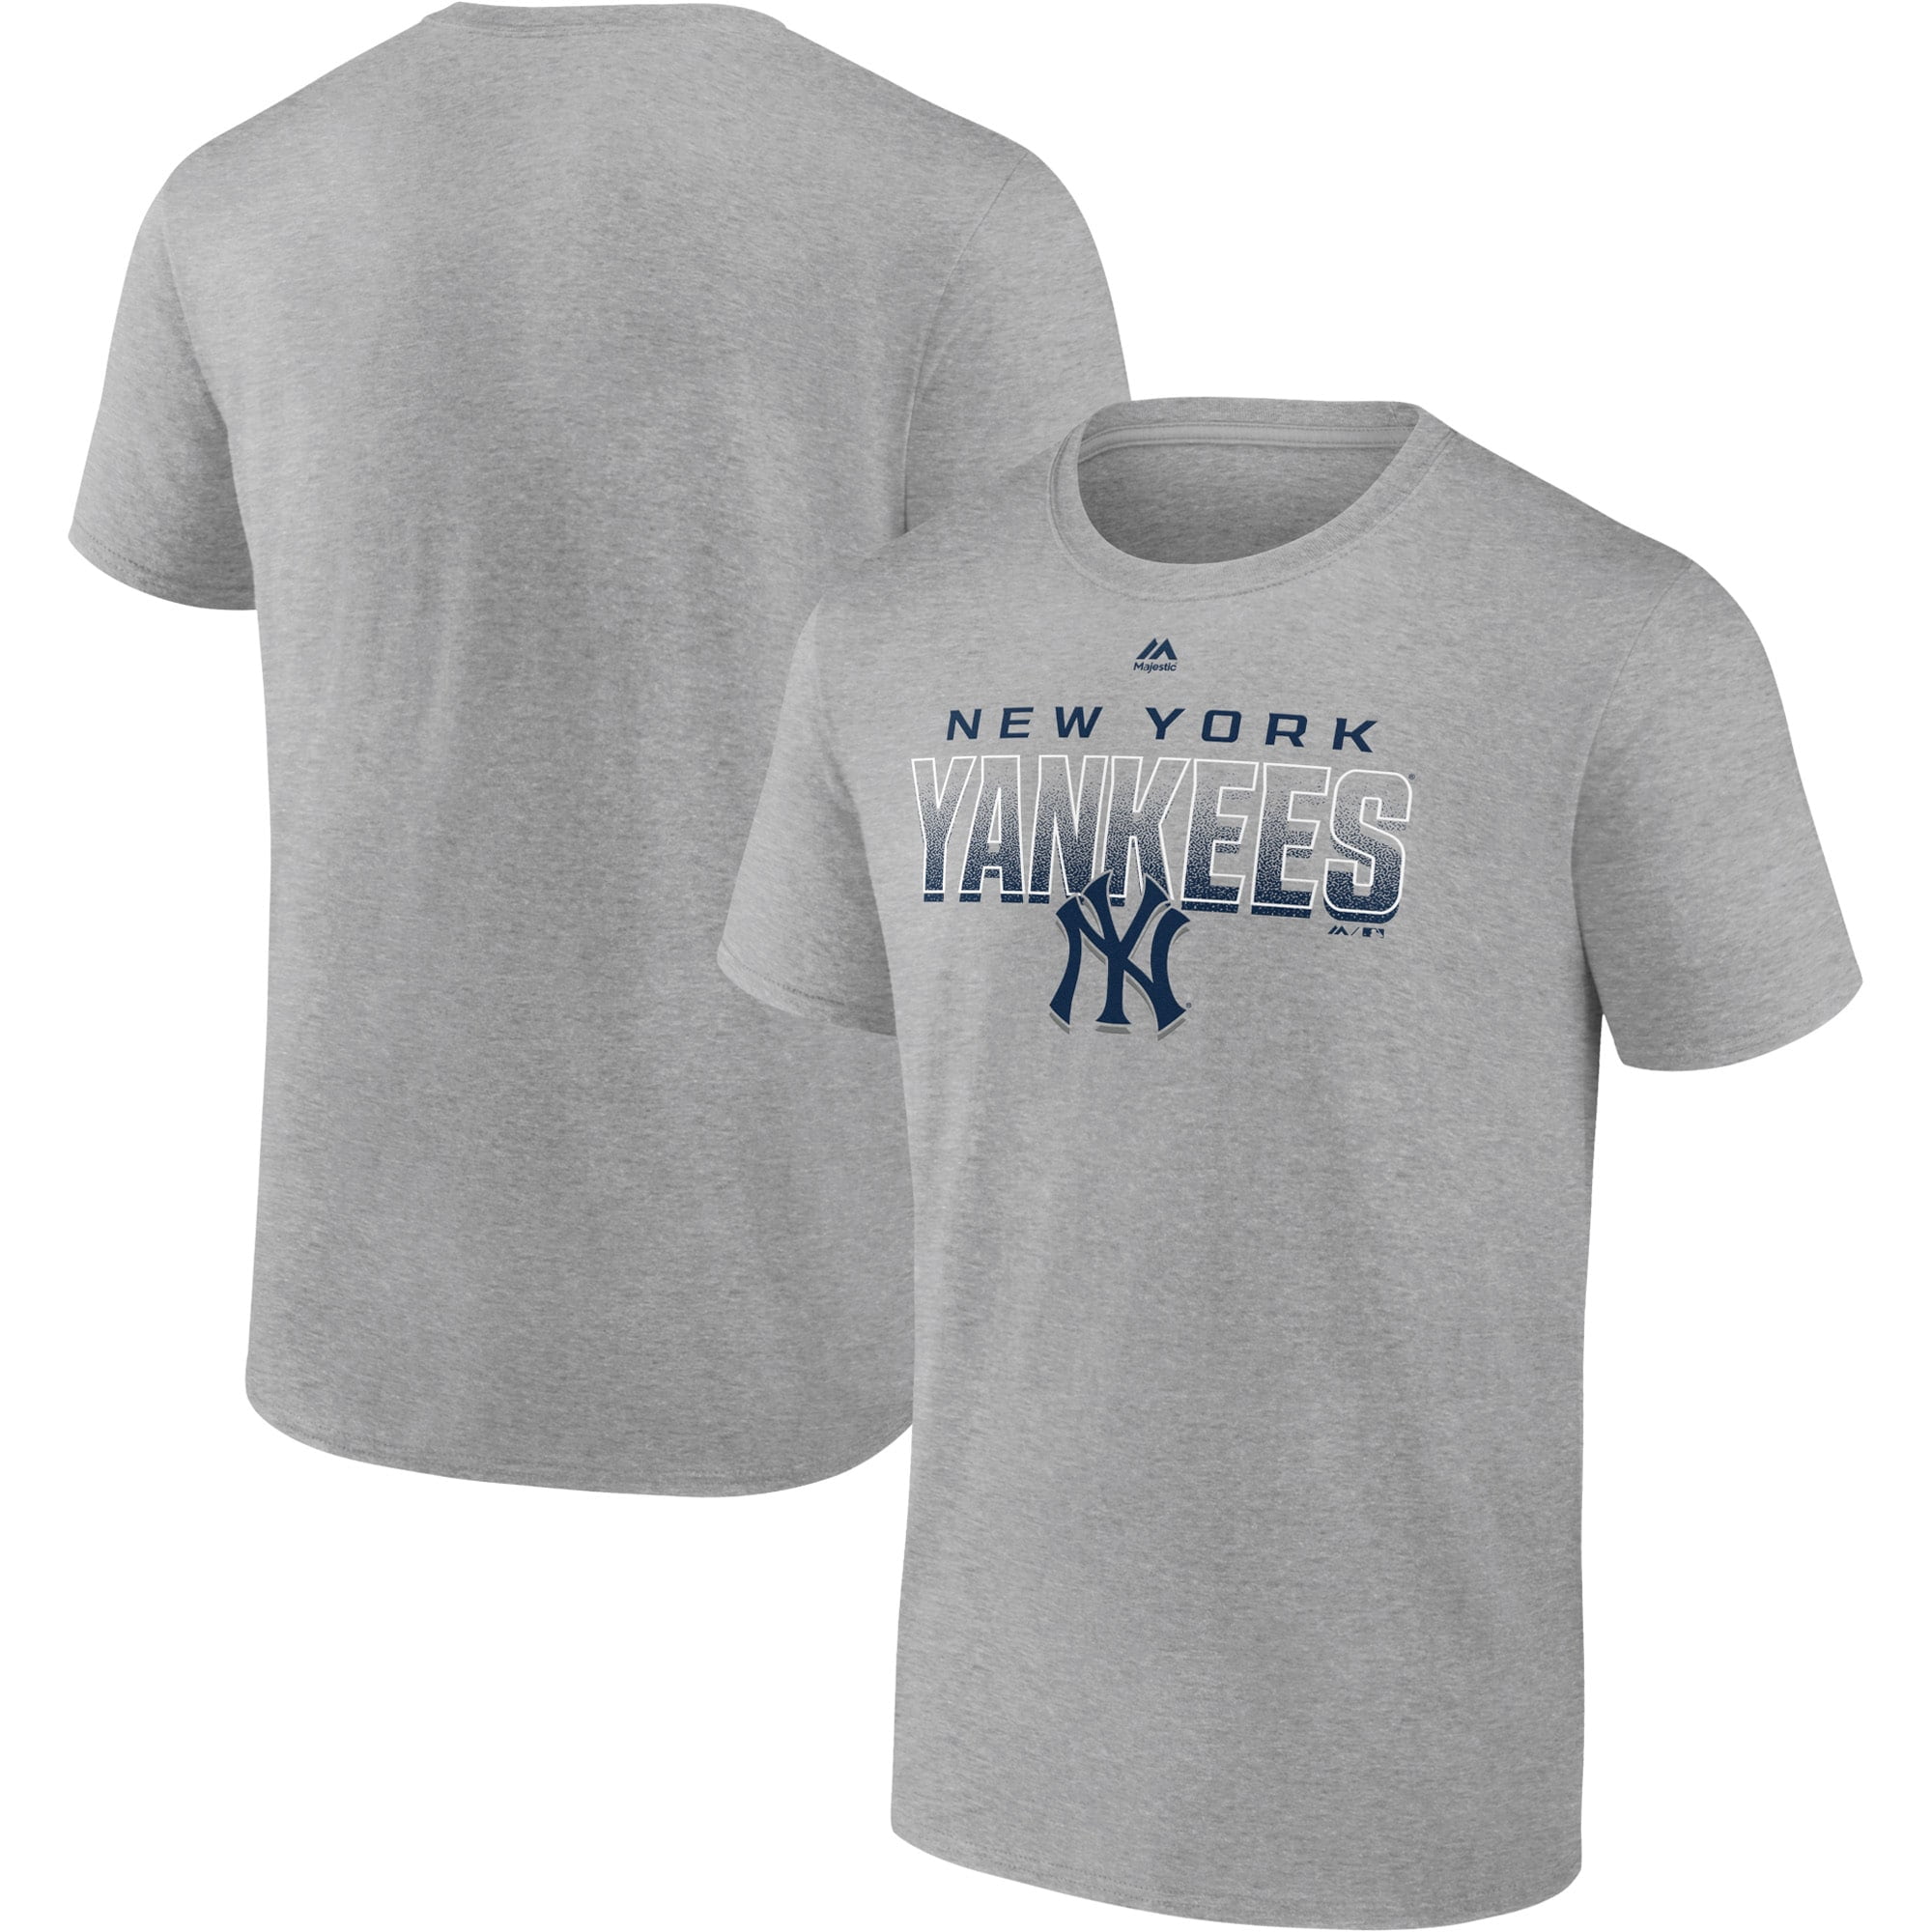 Men's Majestic Heathered Gray New York Yankees Fast-Paced T-Shirt